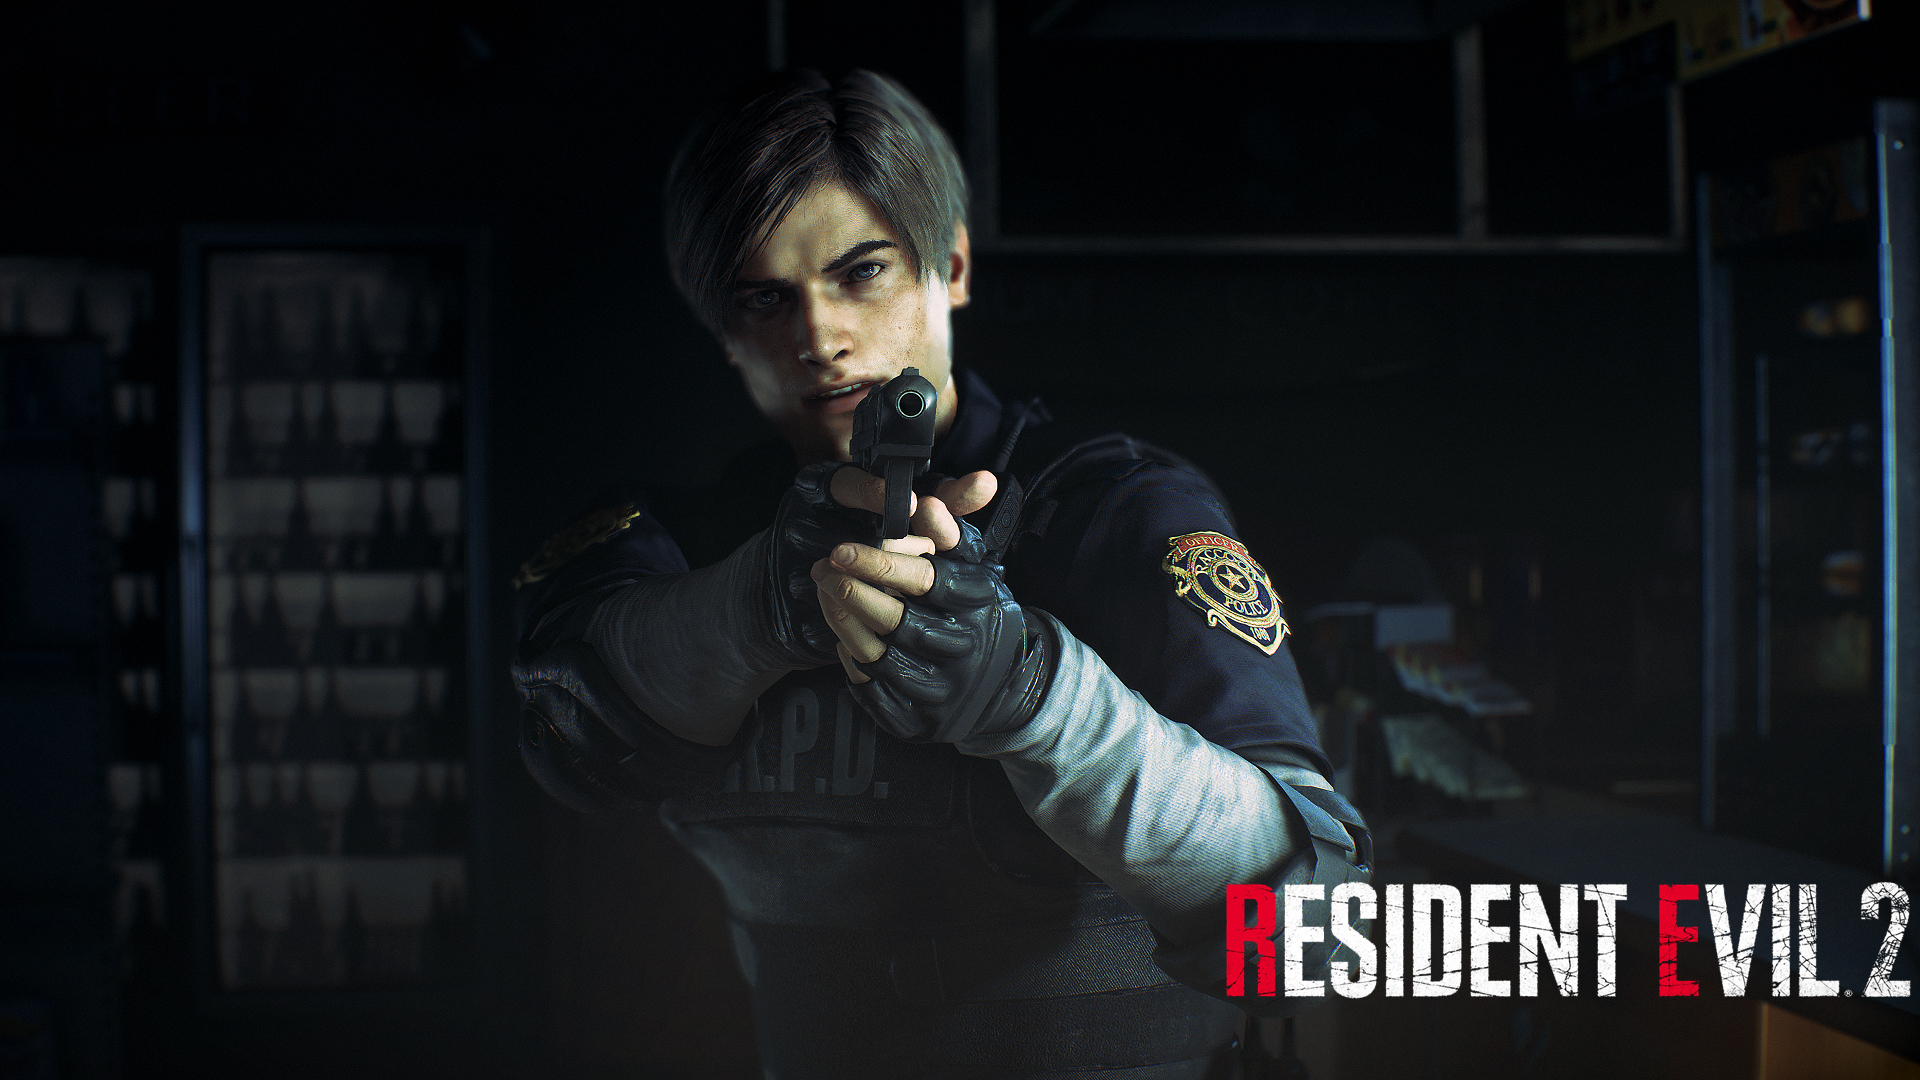 Leon S Kennedy Resident Evil 2 2019 Video Game 1920x1080